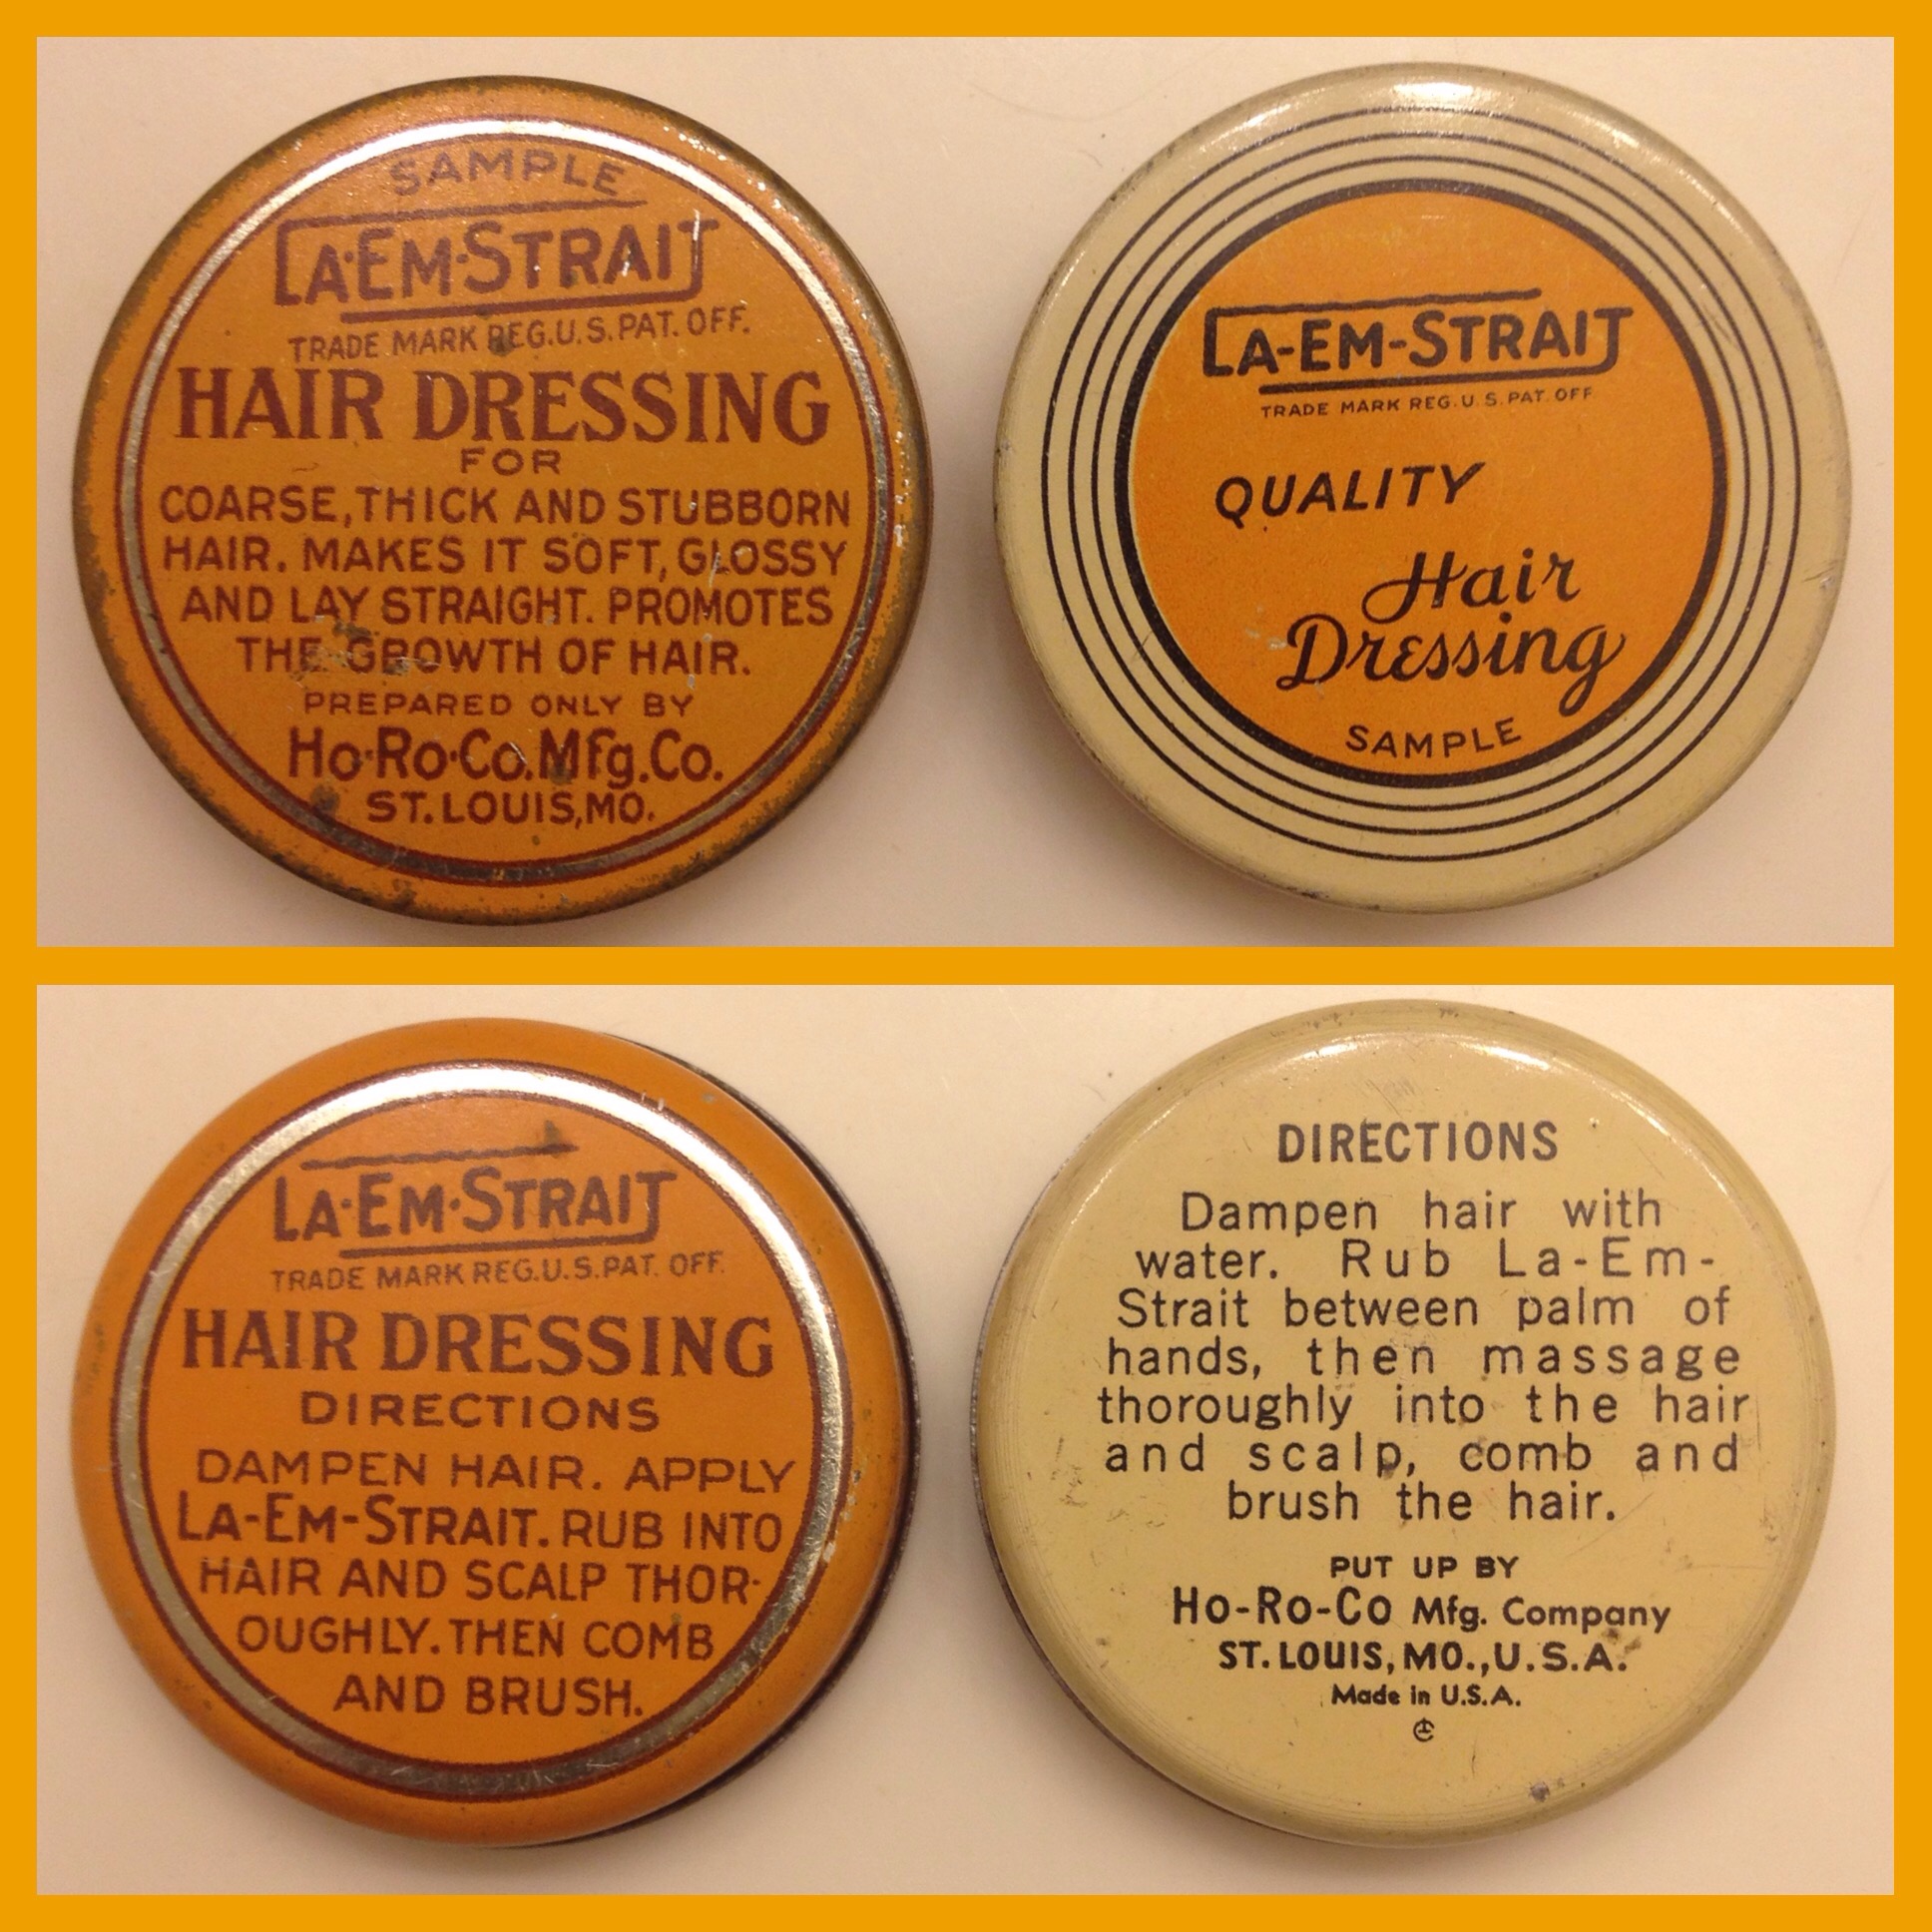  Mister Pompadour Natural Beeswax Paste, Matte Hair Product for  Men & Women, HIgh Hold & No Shine, Water Based - Easy To Wash